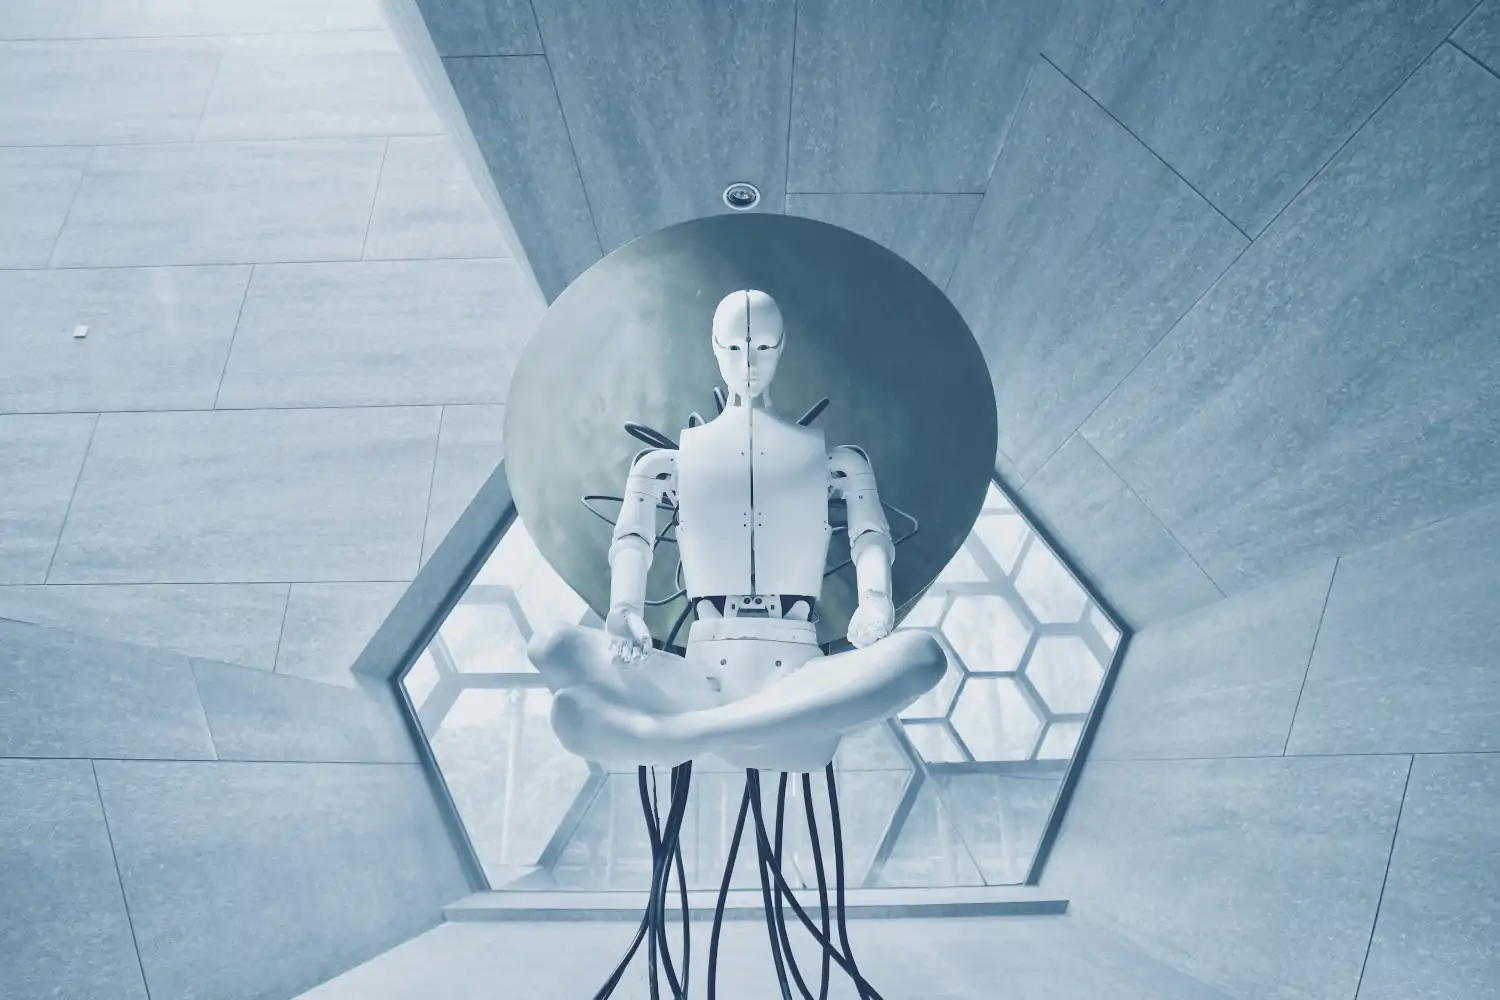 A white humanoid robot floats atop a throne of black wires in a grey room